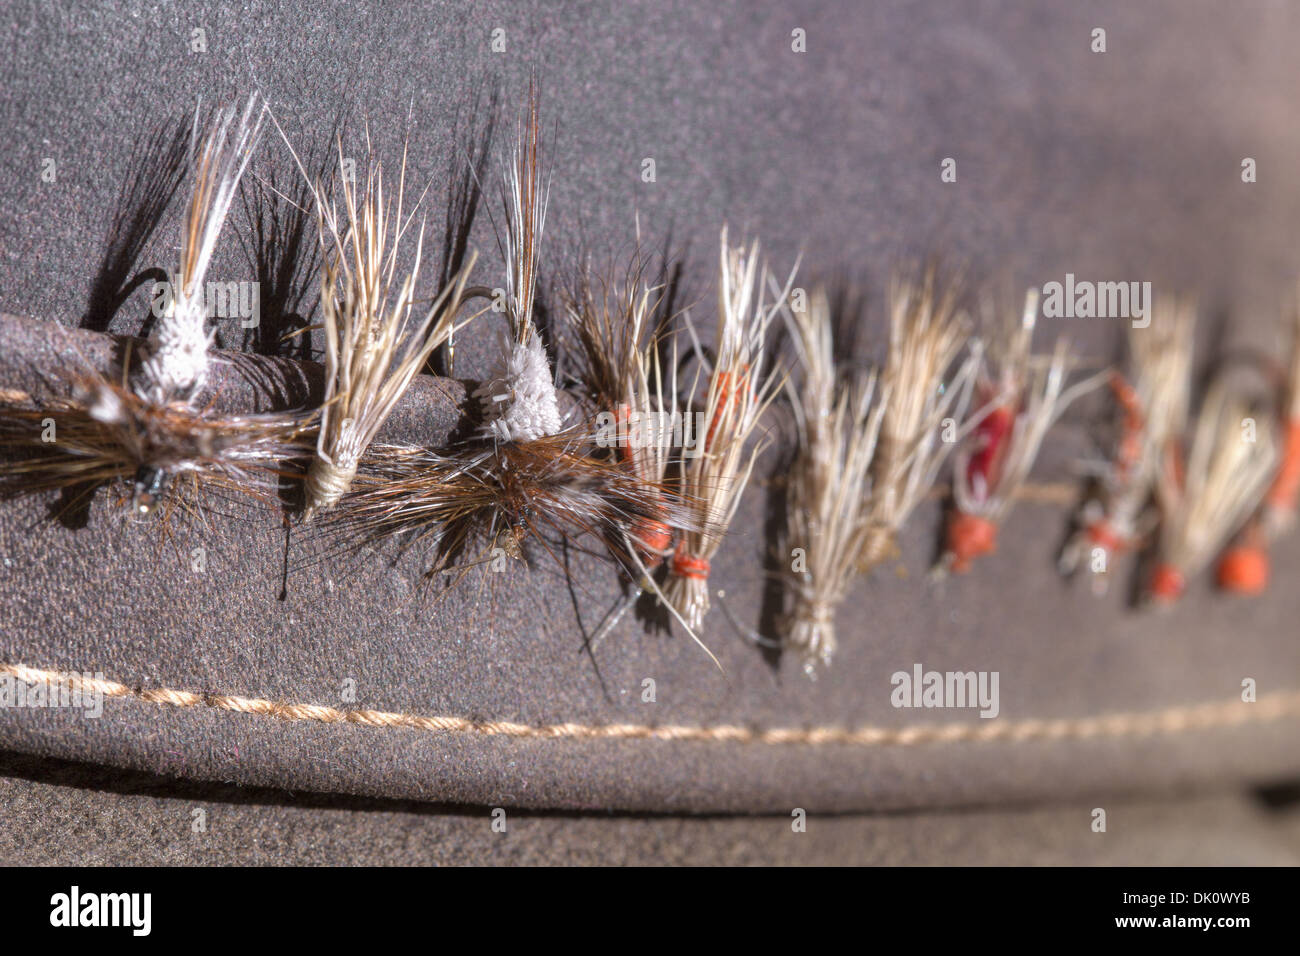 Trout flies adorn an old fishing hat. Stock Photo